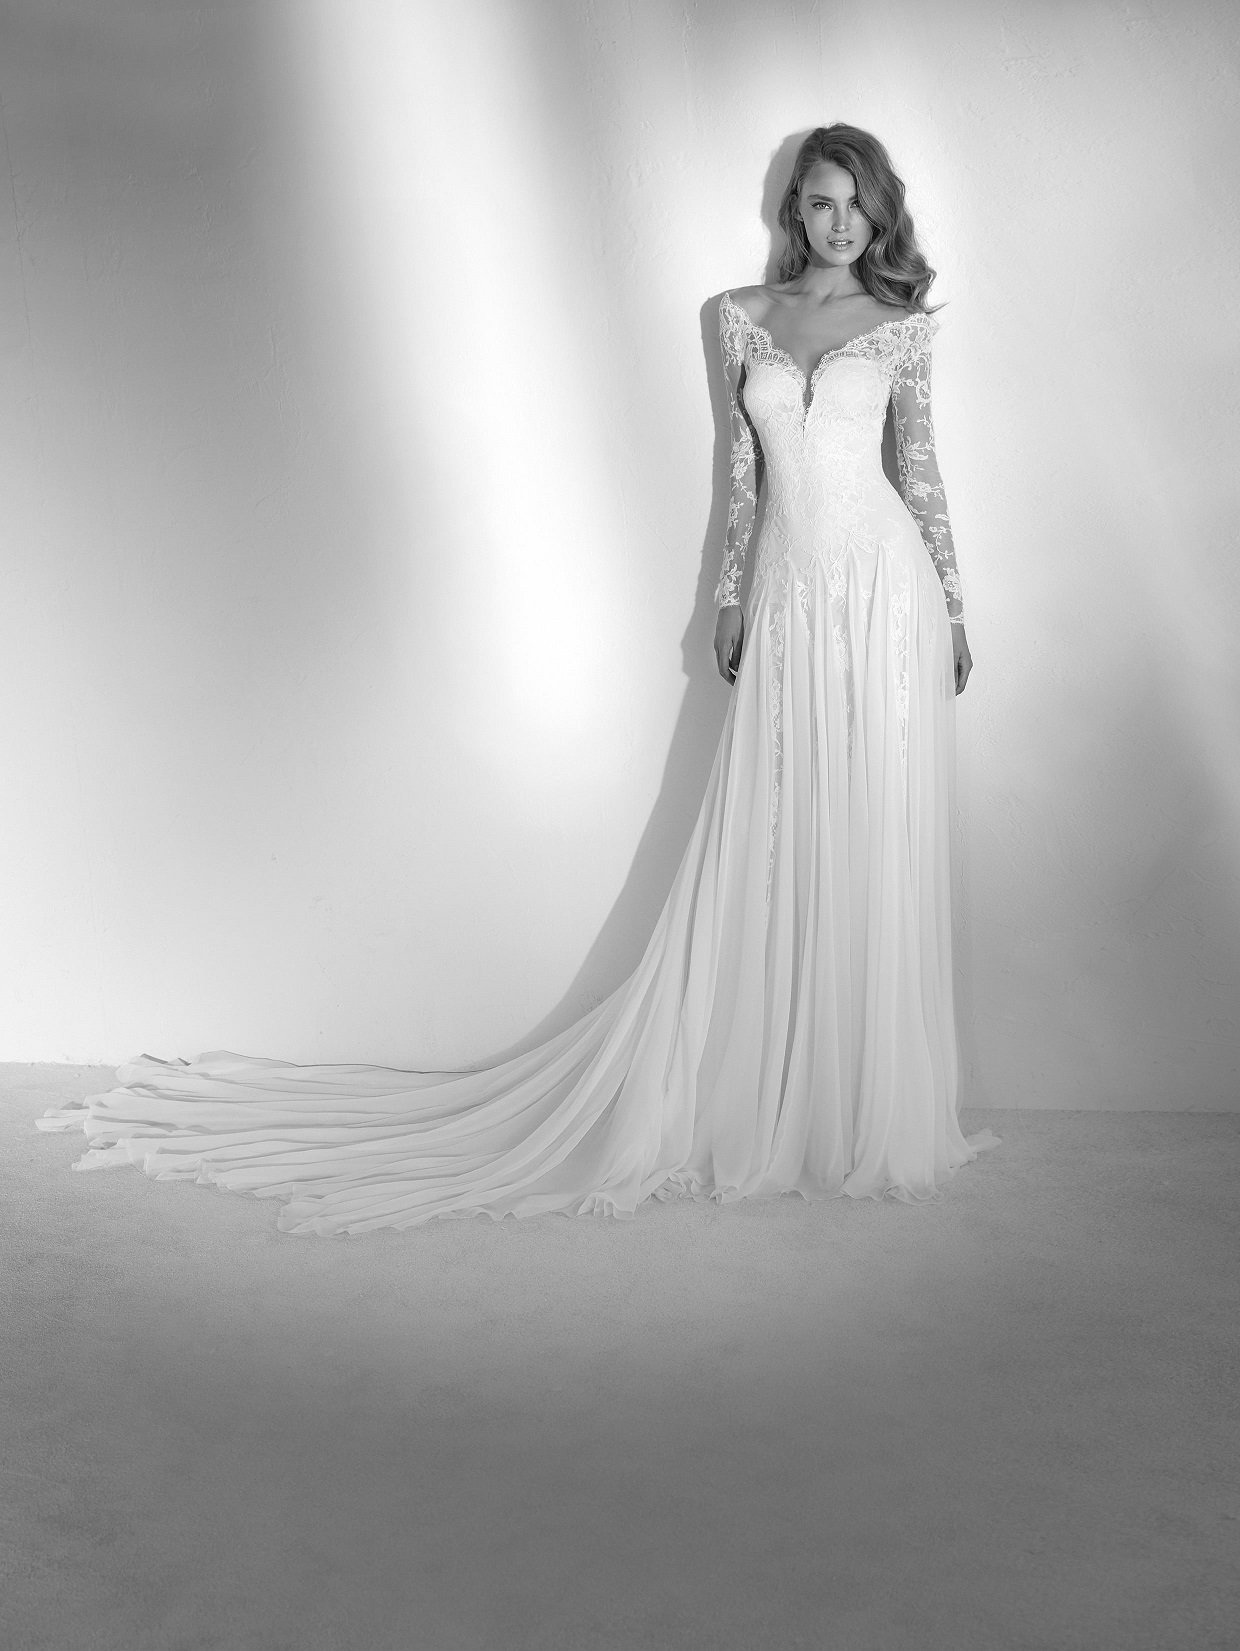 Dreamy Wedding Gown With An Off The Shoulder Neckline Modes Bridal Nz